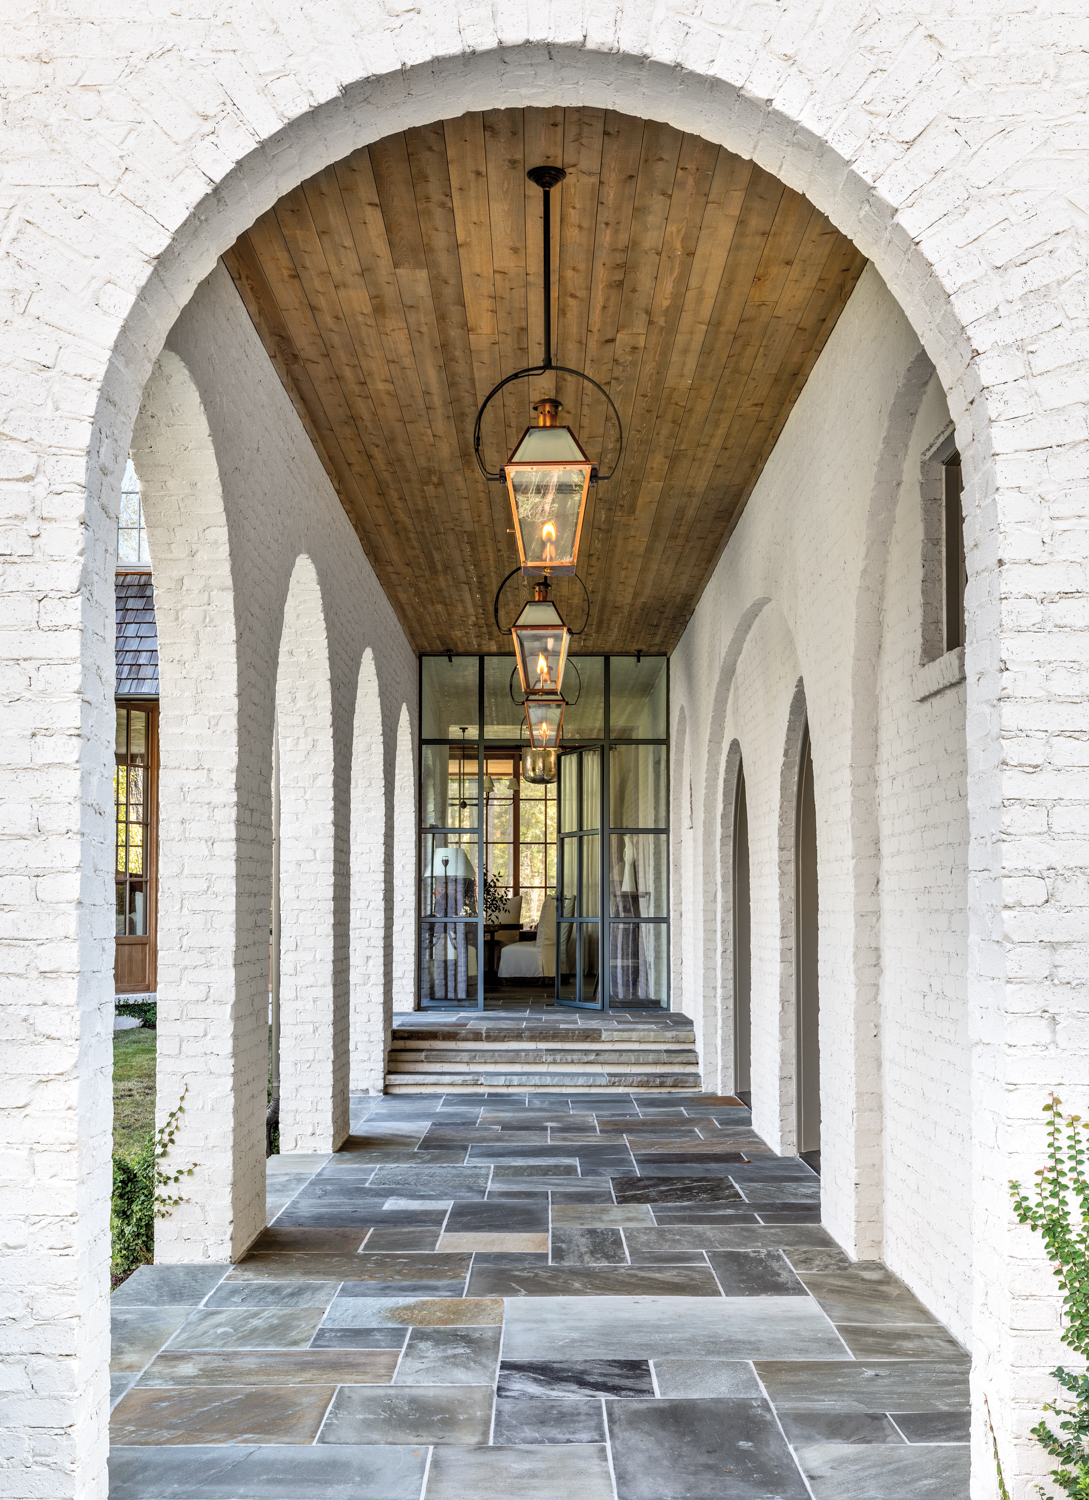 Exterior passageway with brick arches, hanging lanterns and a wooden ceiling